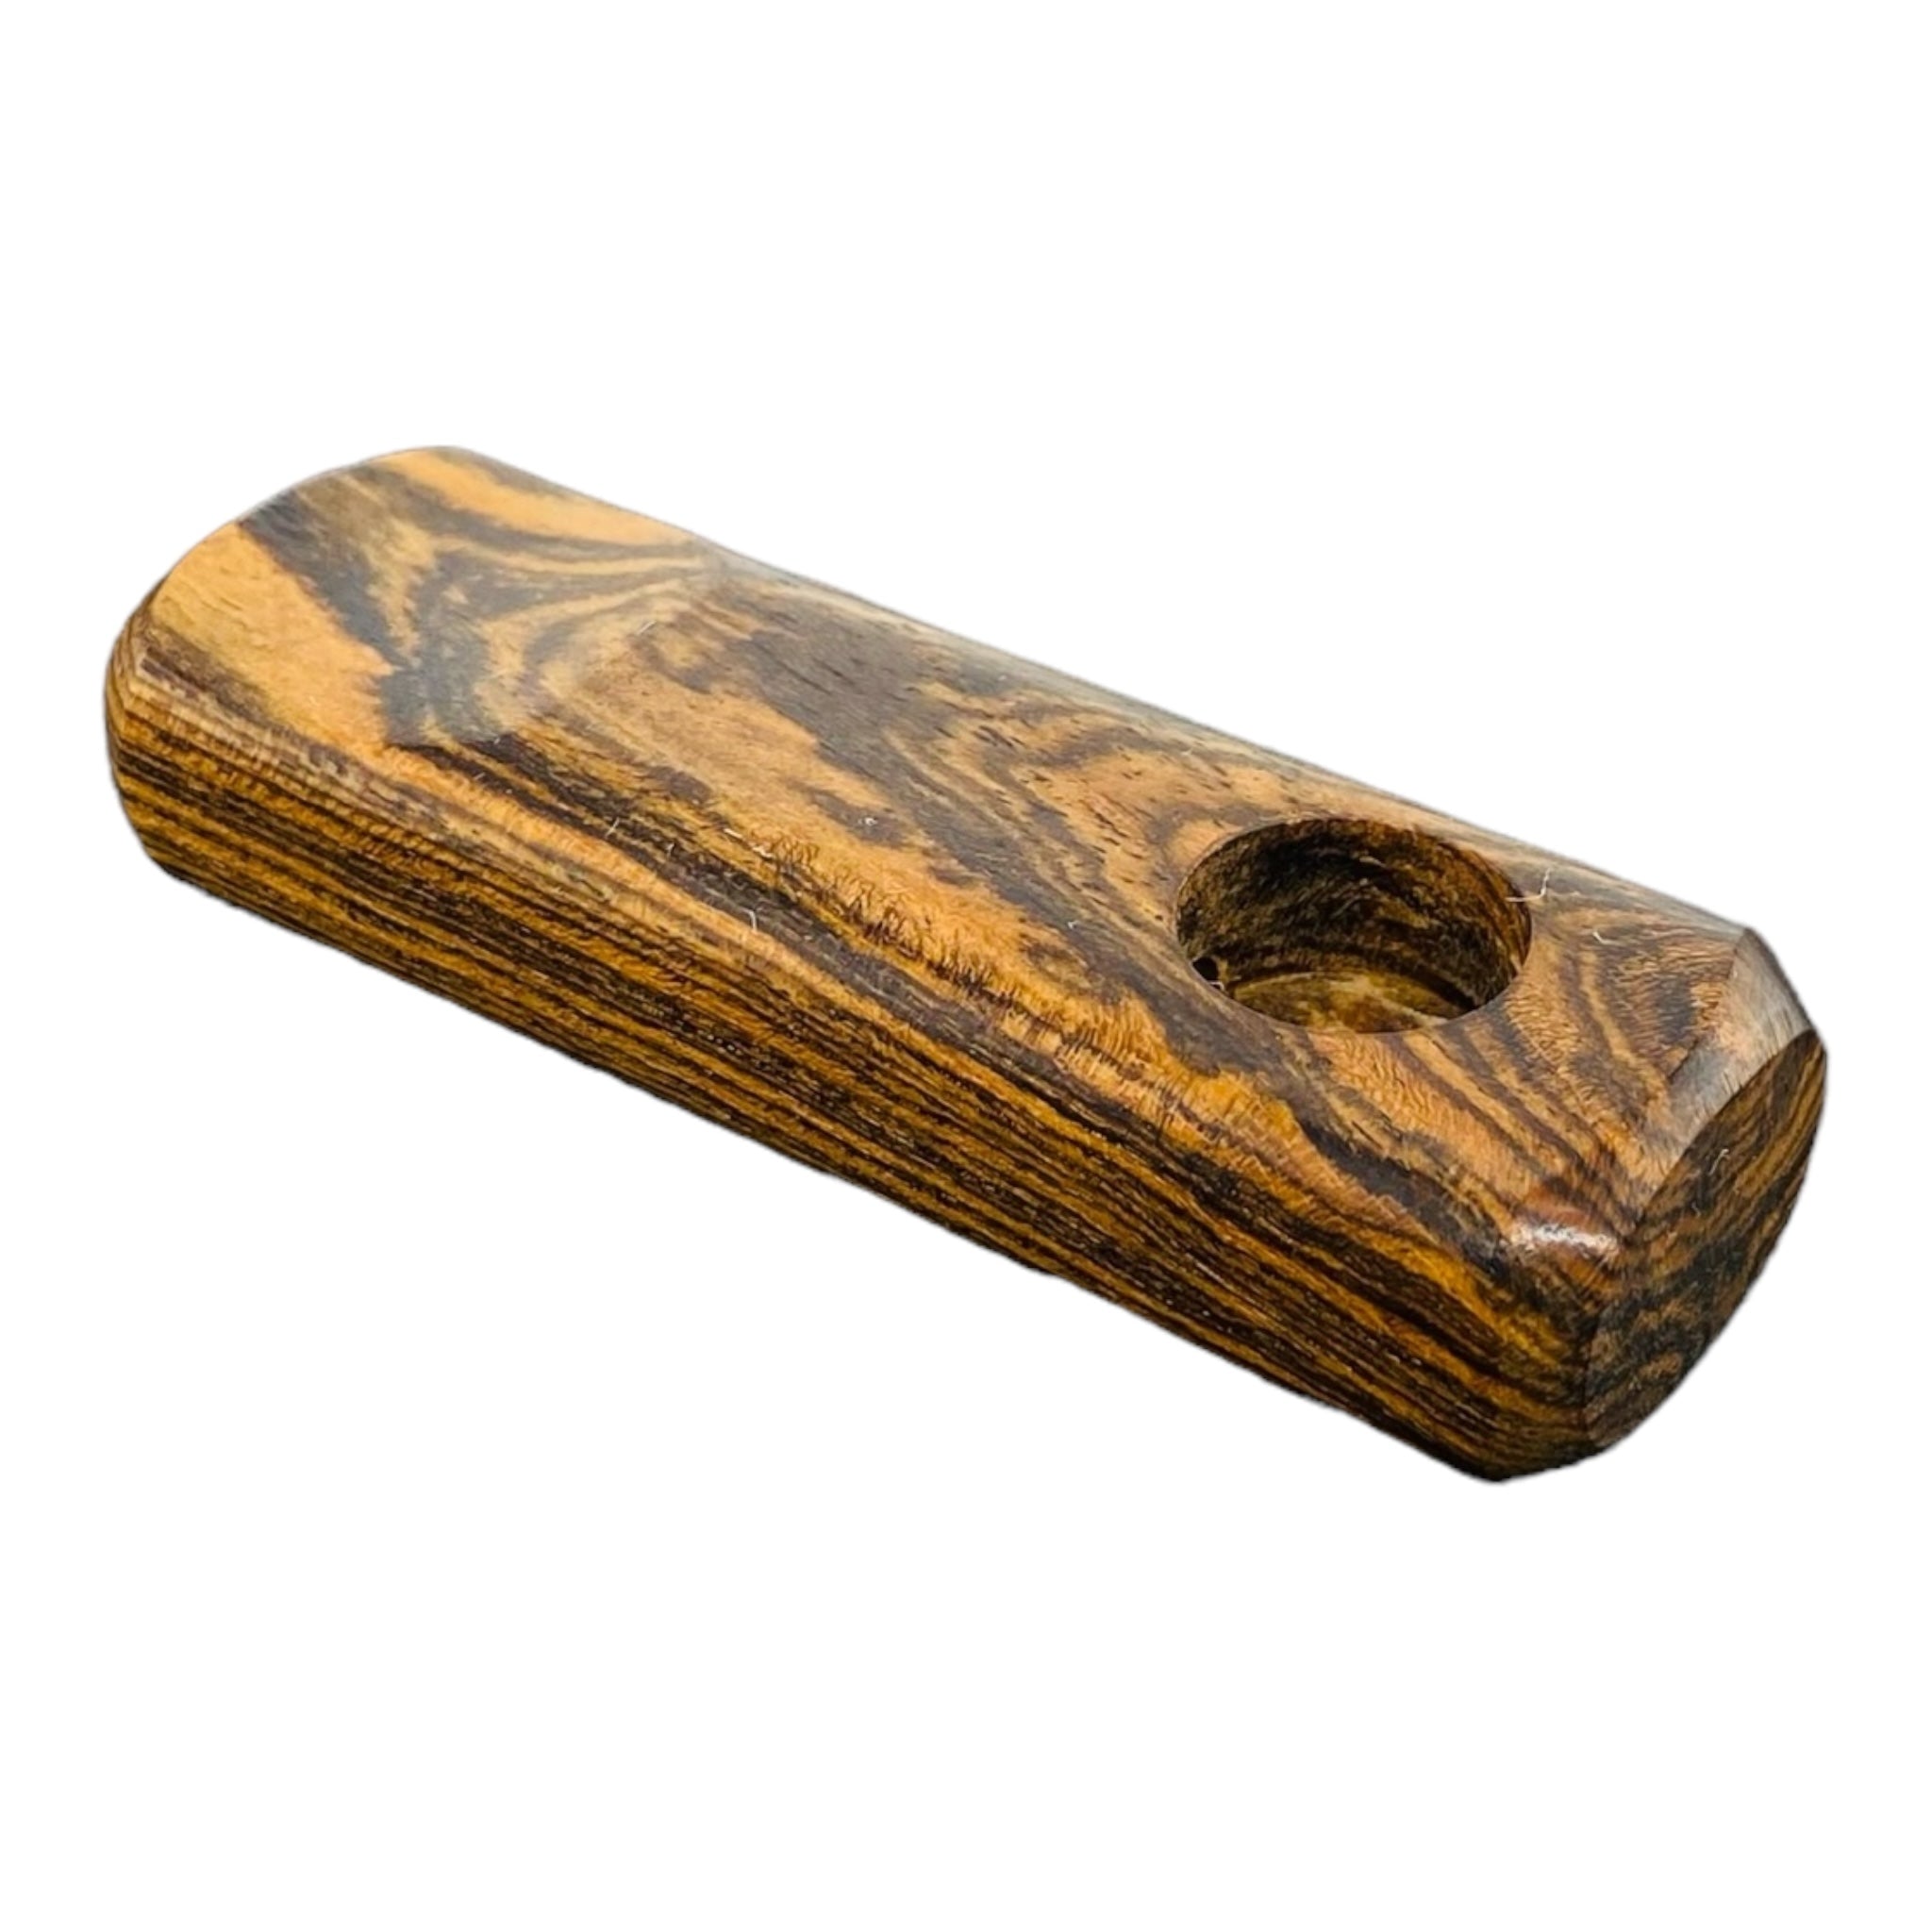 Wood Hand Pipe - Two Basic Small Rectangle Wood Pipes